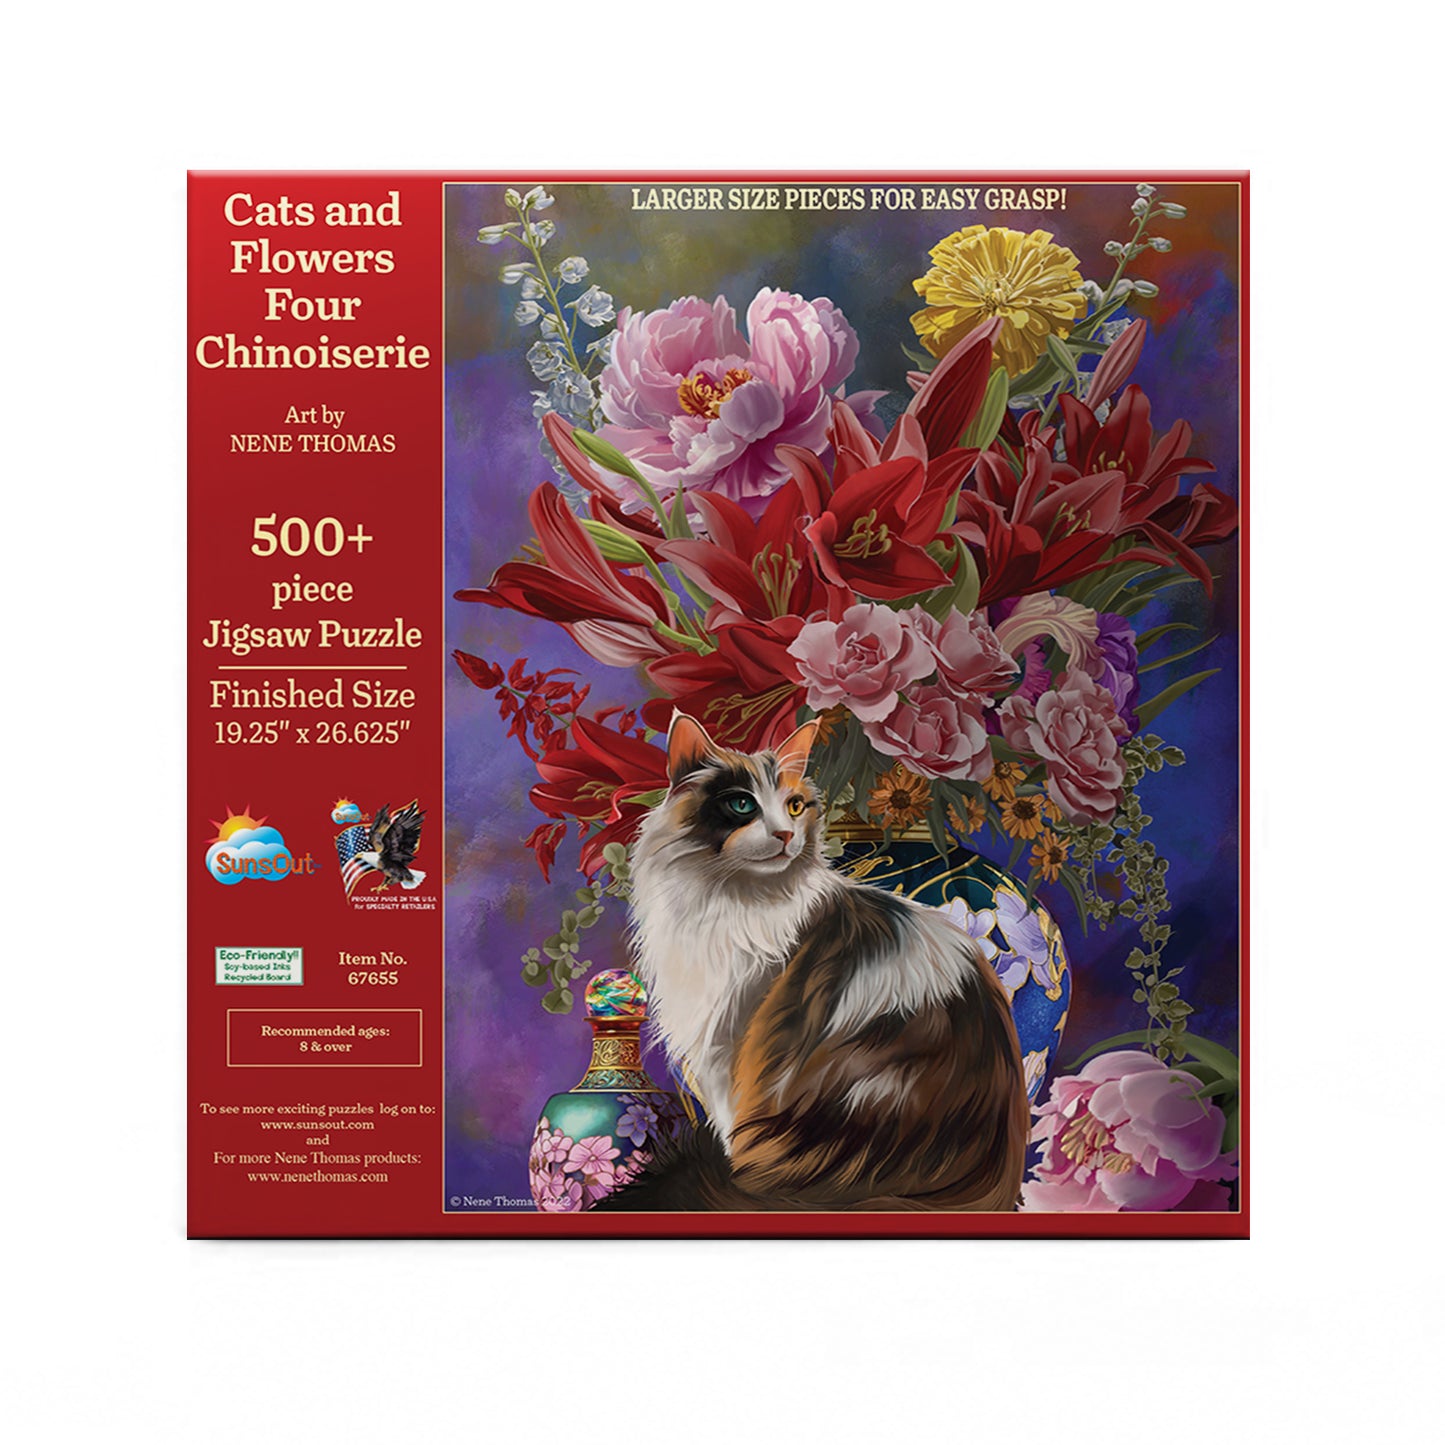 Cats and Flowers Four Chinoiserie - 500 Large Piece Jigsaw Puzzle